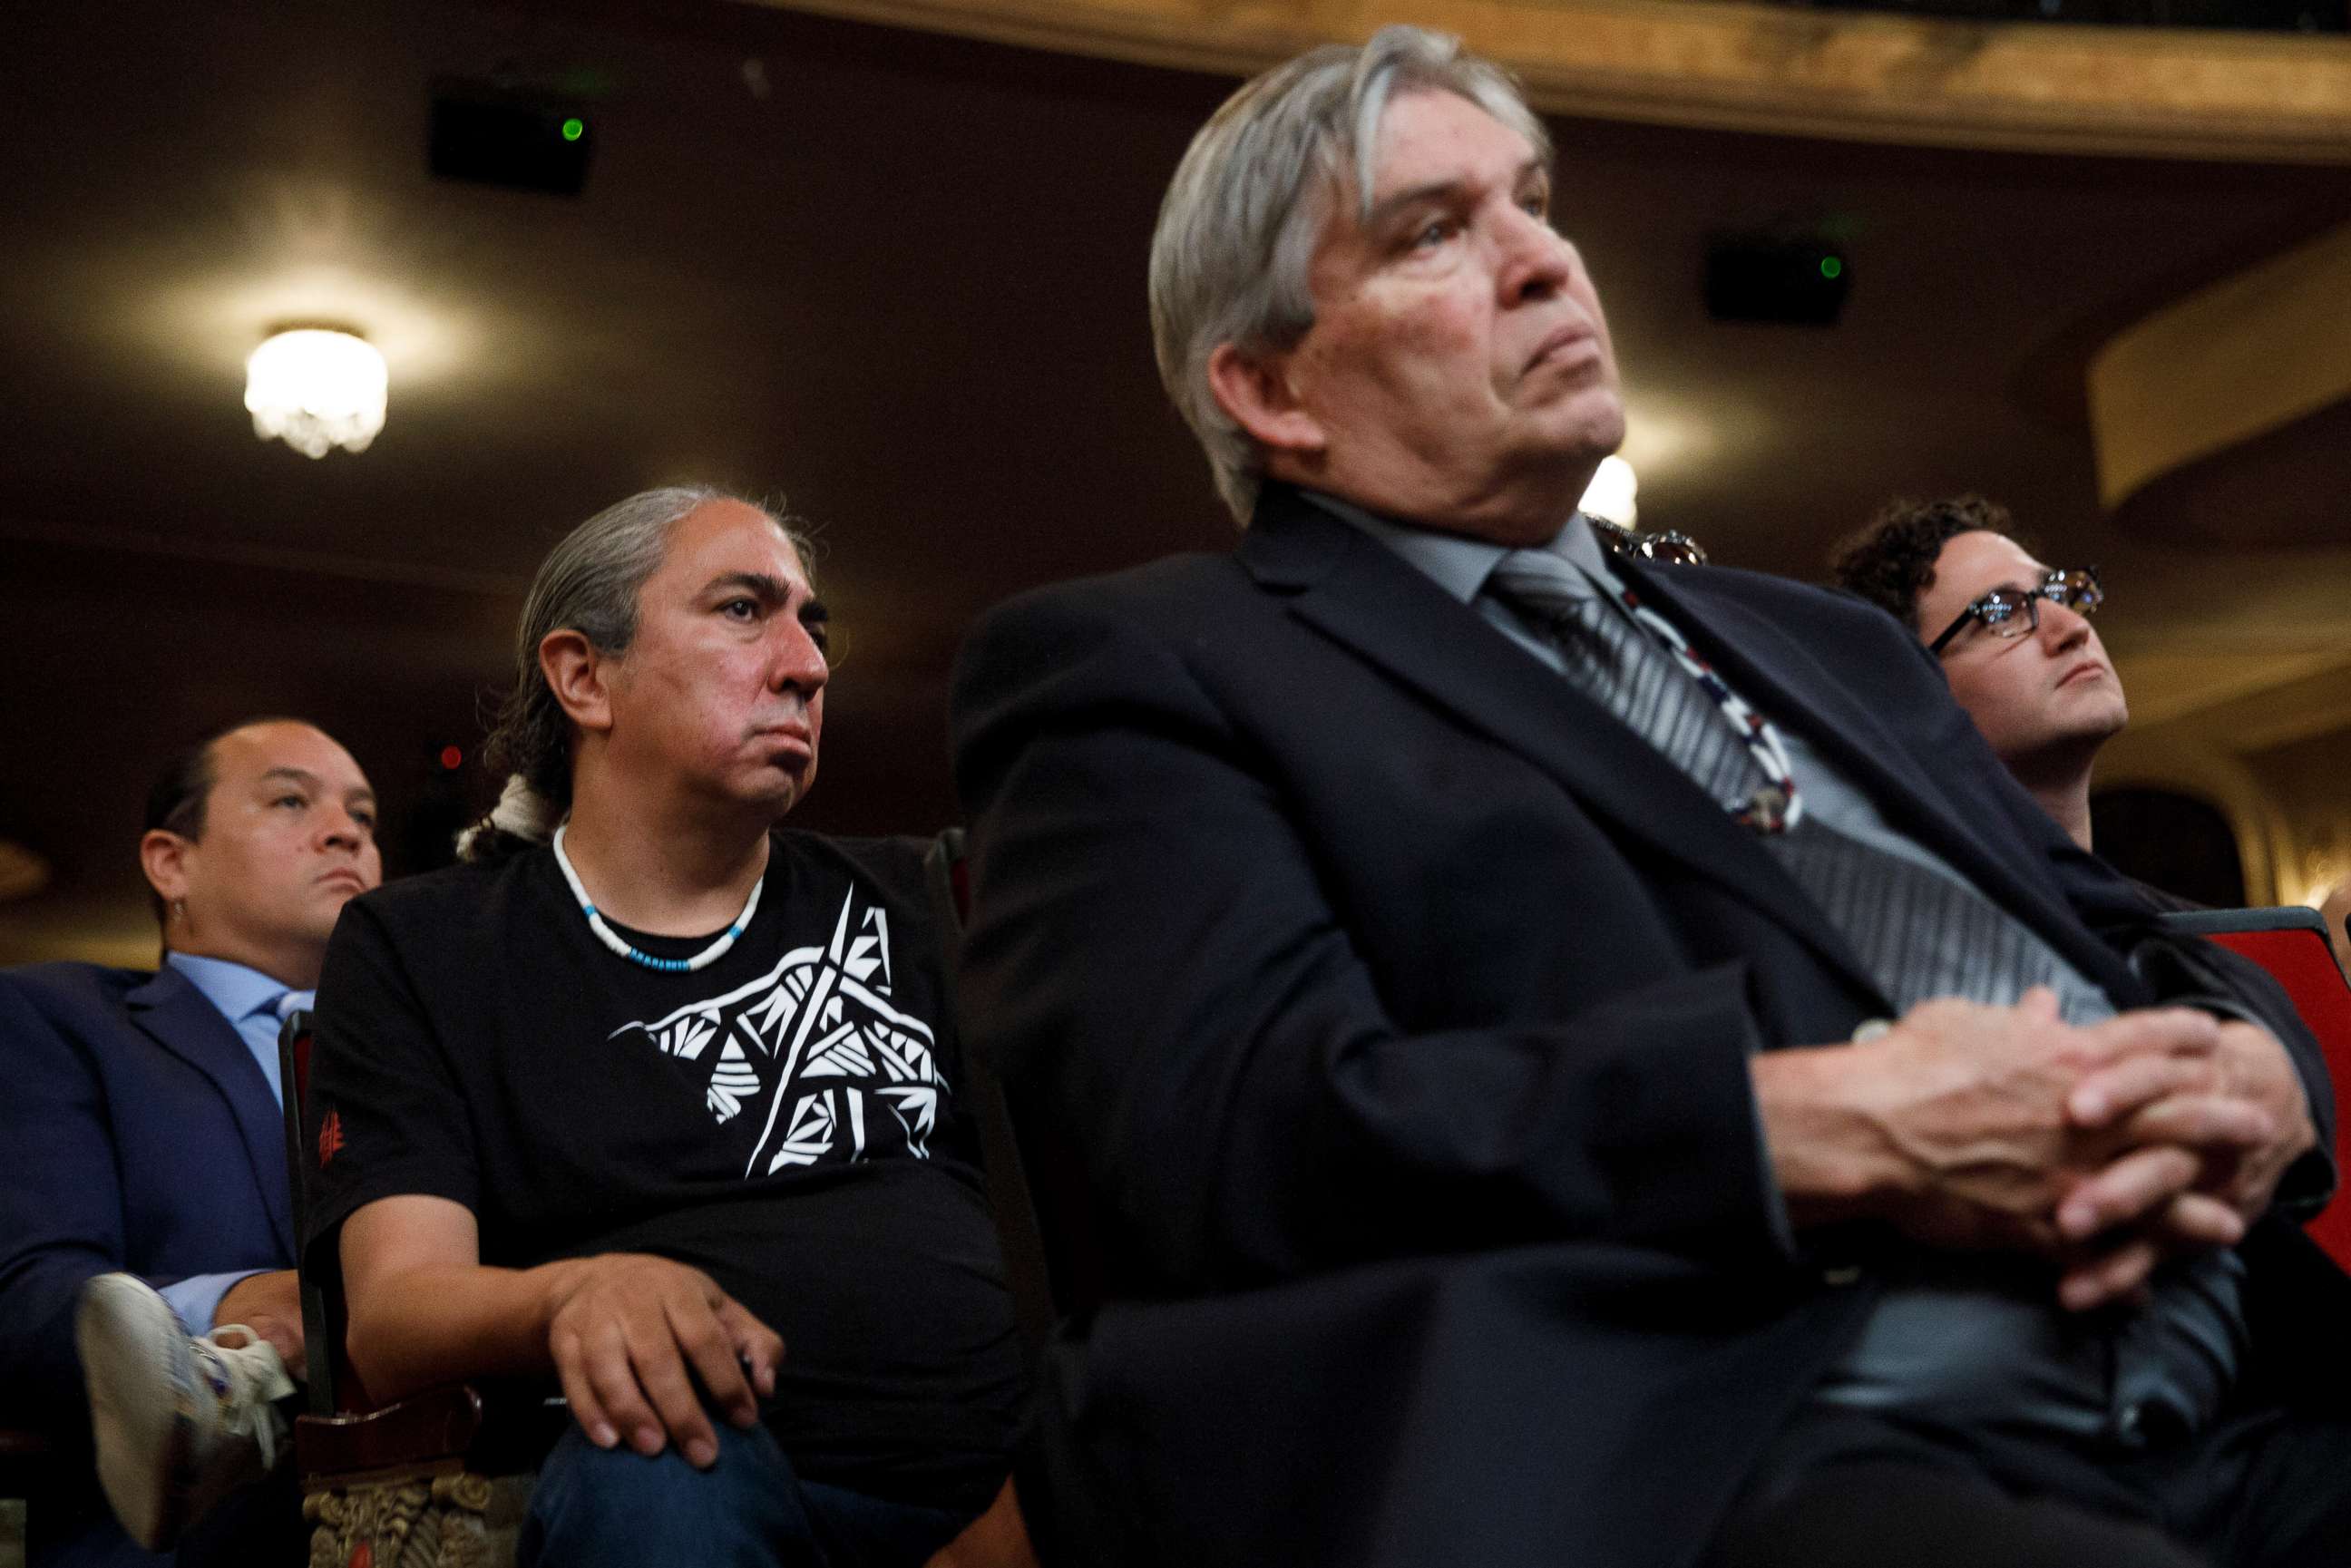 PHOTO: Audience members watch as Sen. Elizabeth Warren takes questions from a panel during a presidential forum on Native American issues in Sioux City, Iowa, Aug. 19, 2019.
